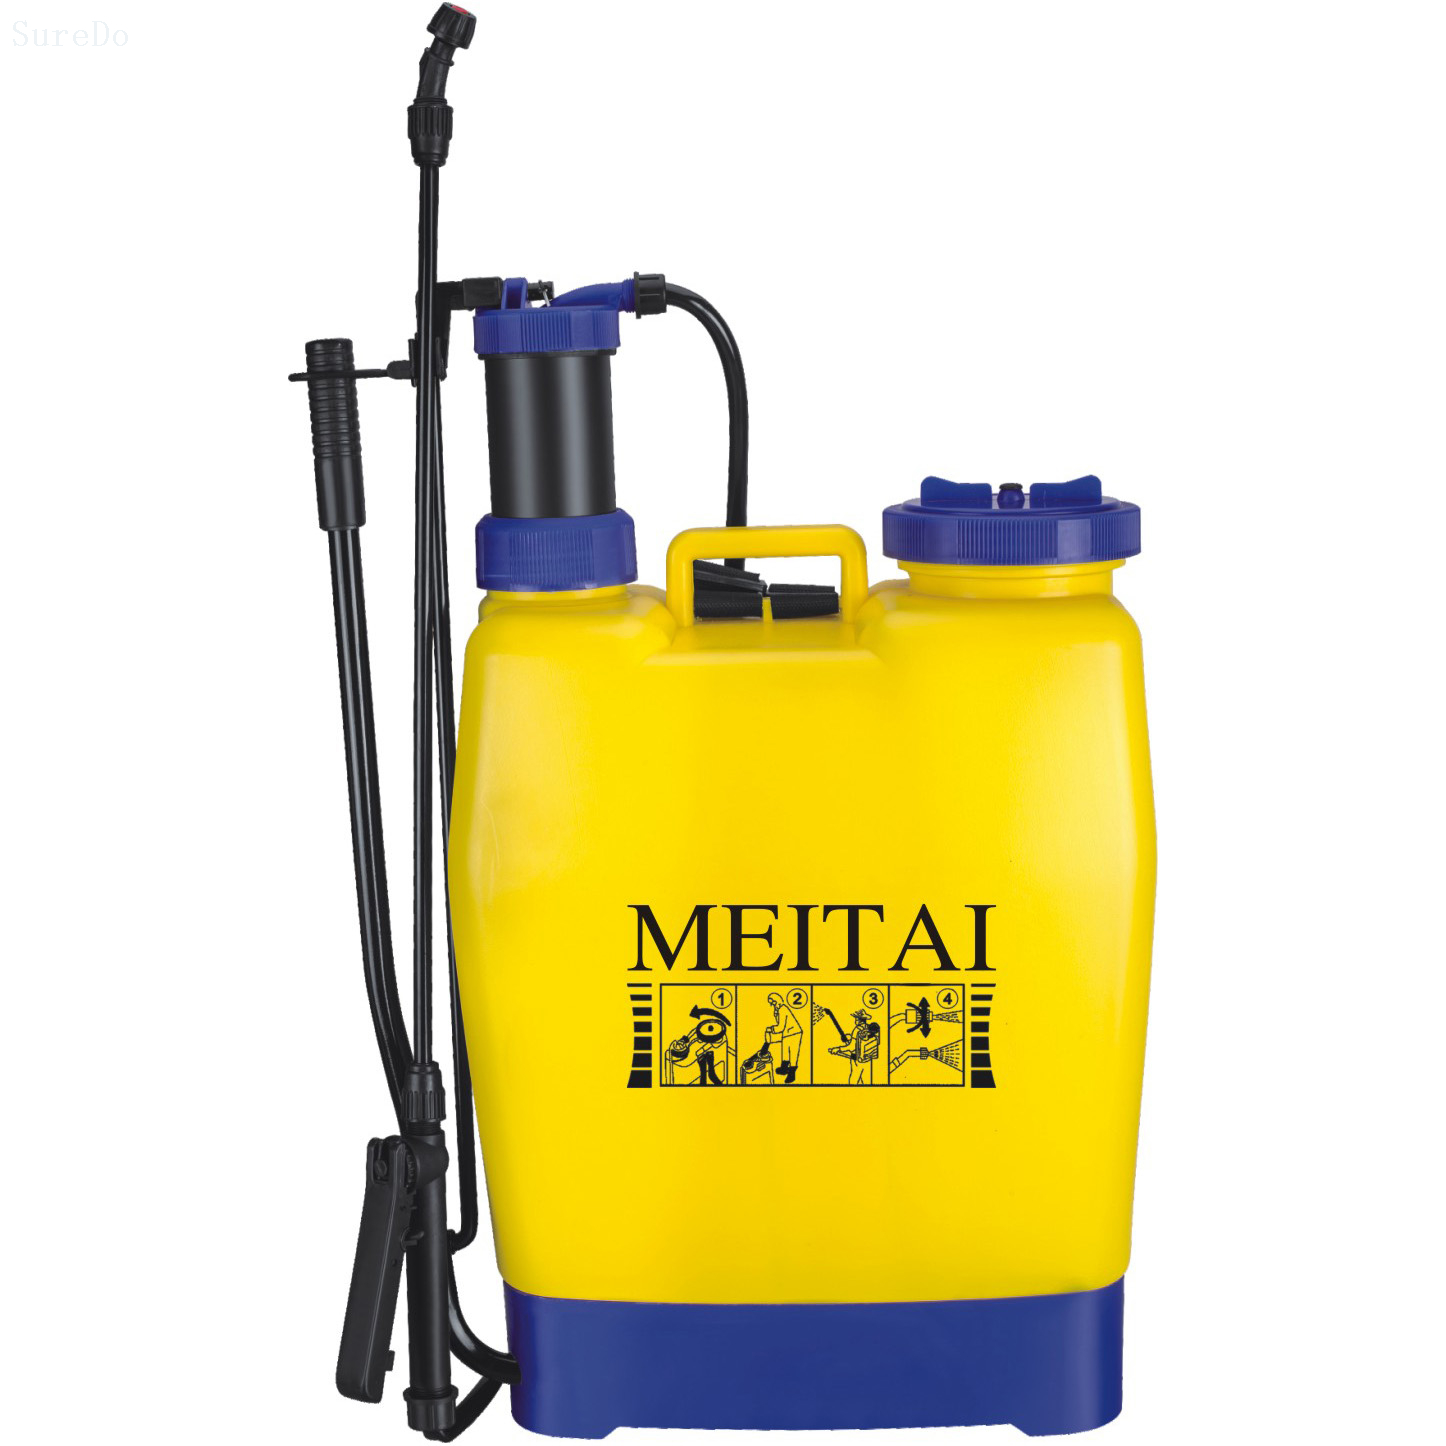 5-Gallon backpack plastic sprayer with stainless steel pump